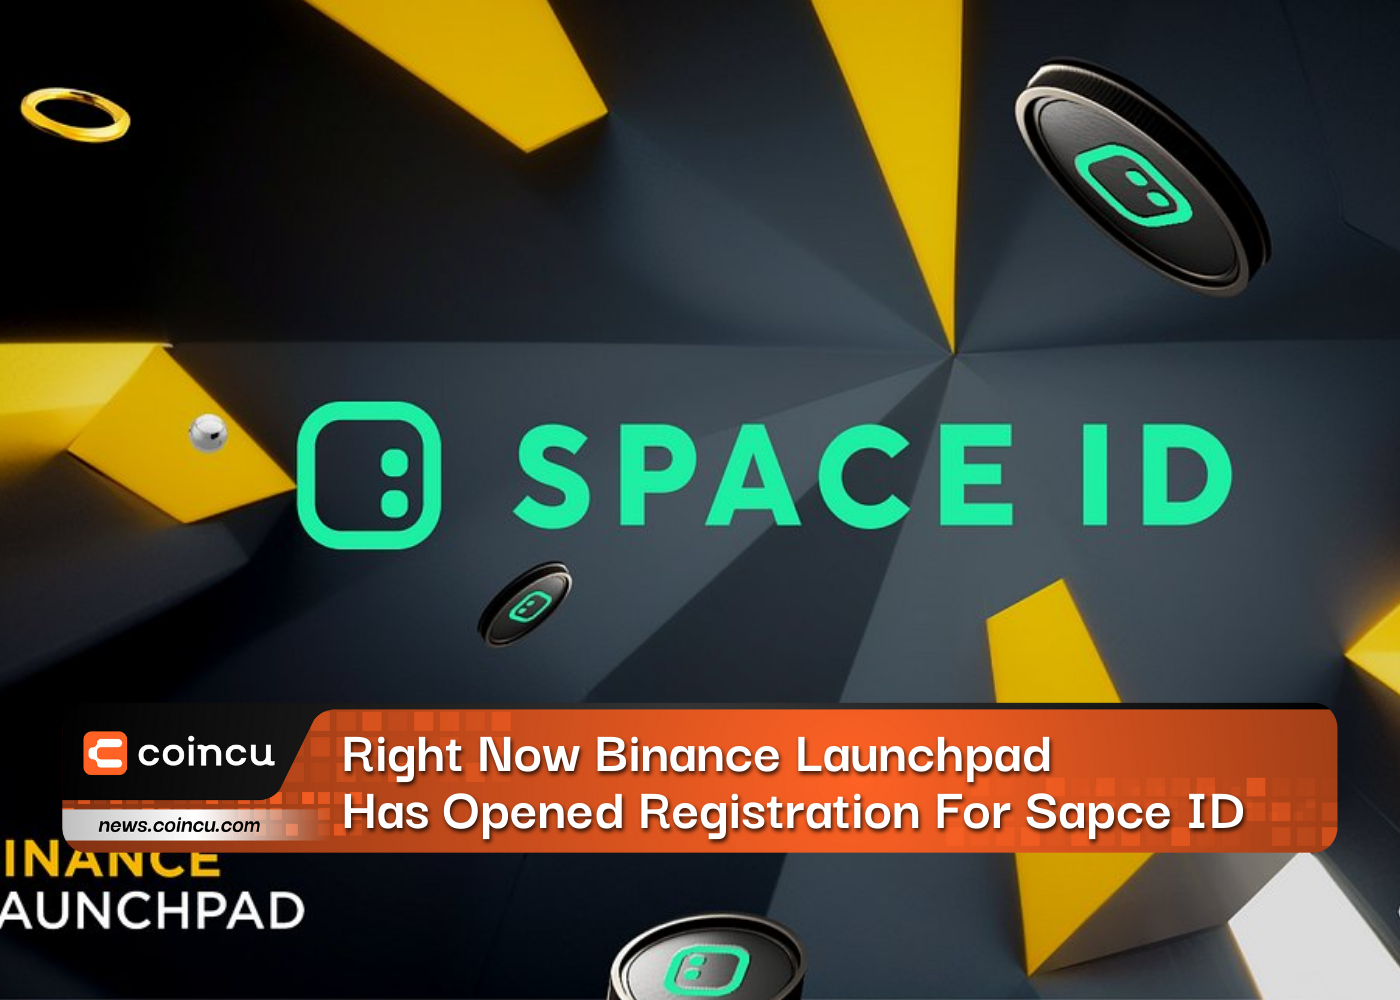 Right Now Binance Launchpad Has Opened Registration For Space ID